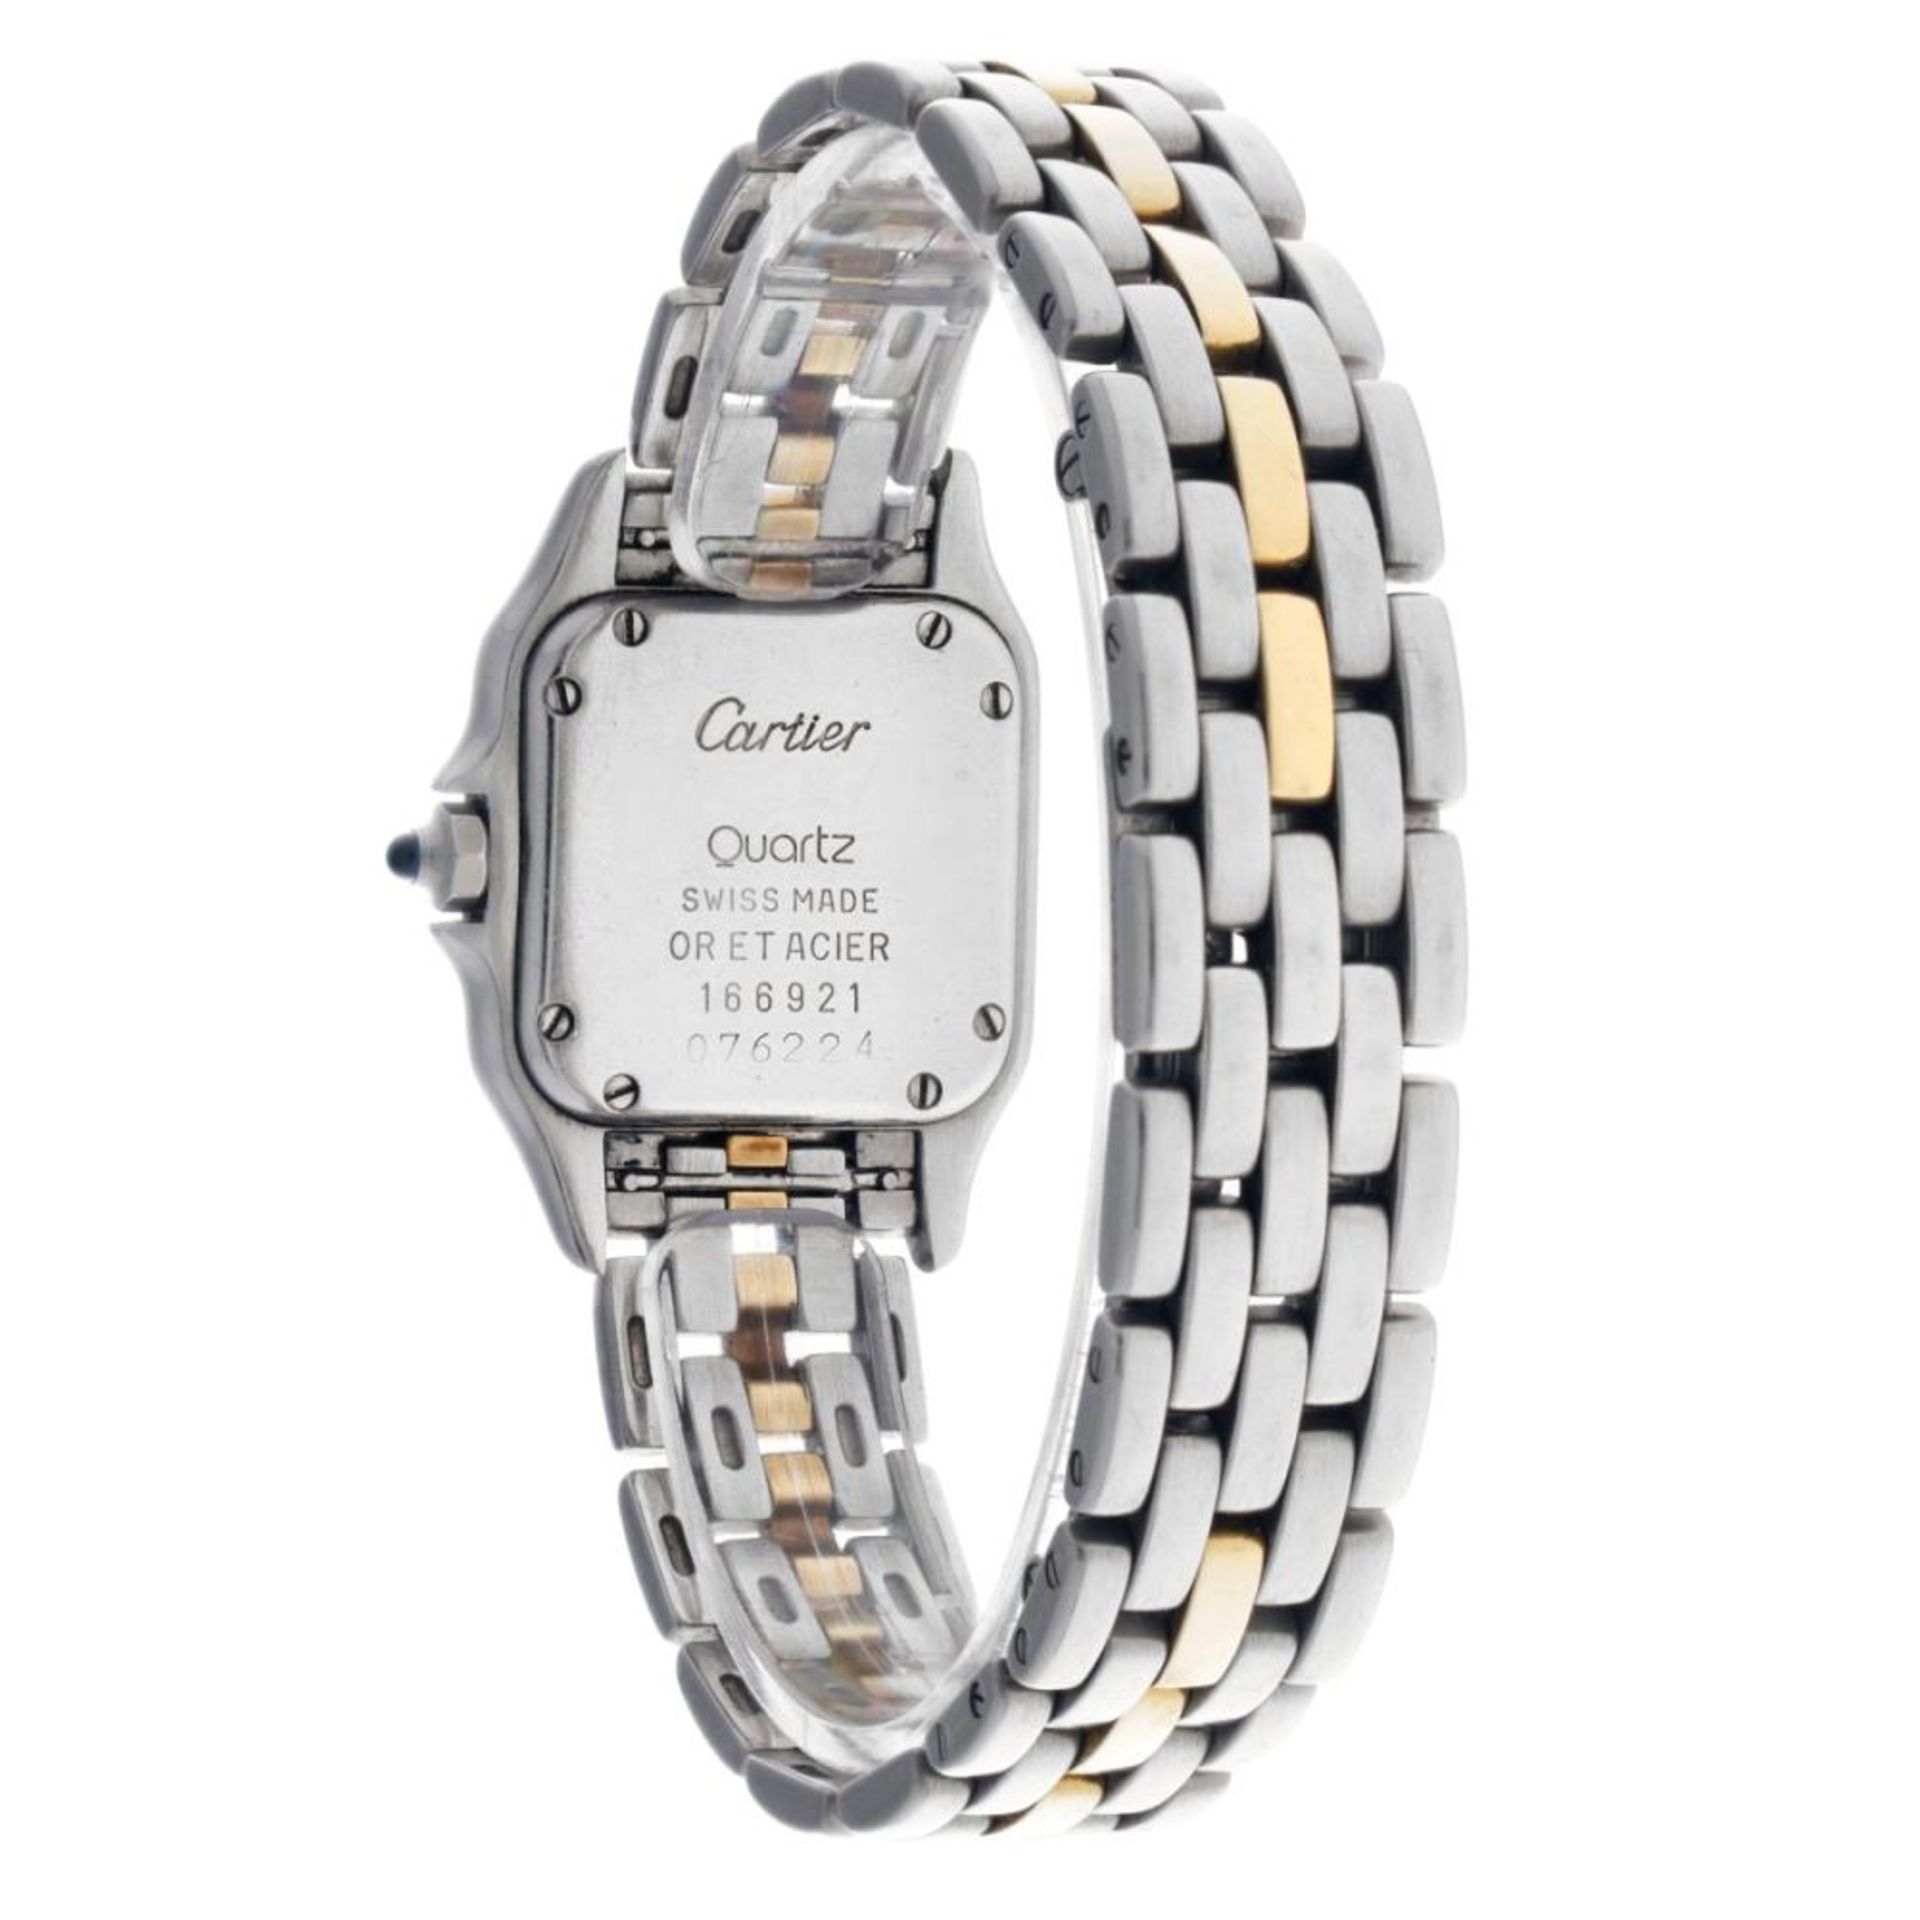 Cartier Panthere 166921 - Ladies watch - approx. 1989. - Image 6 of 12